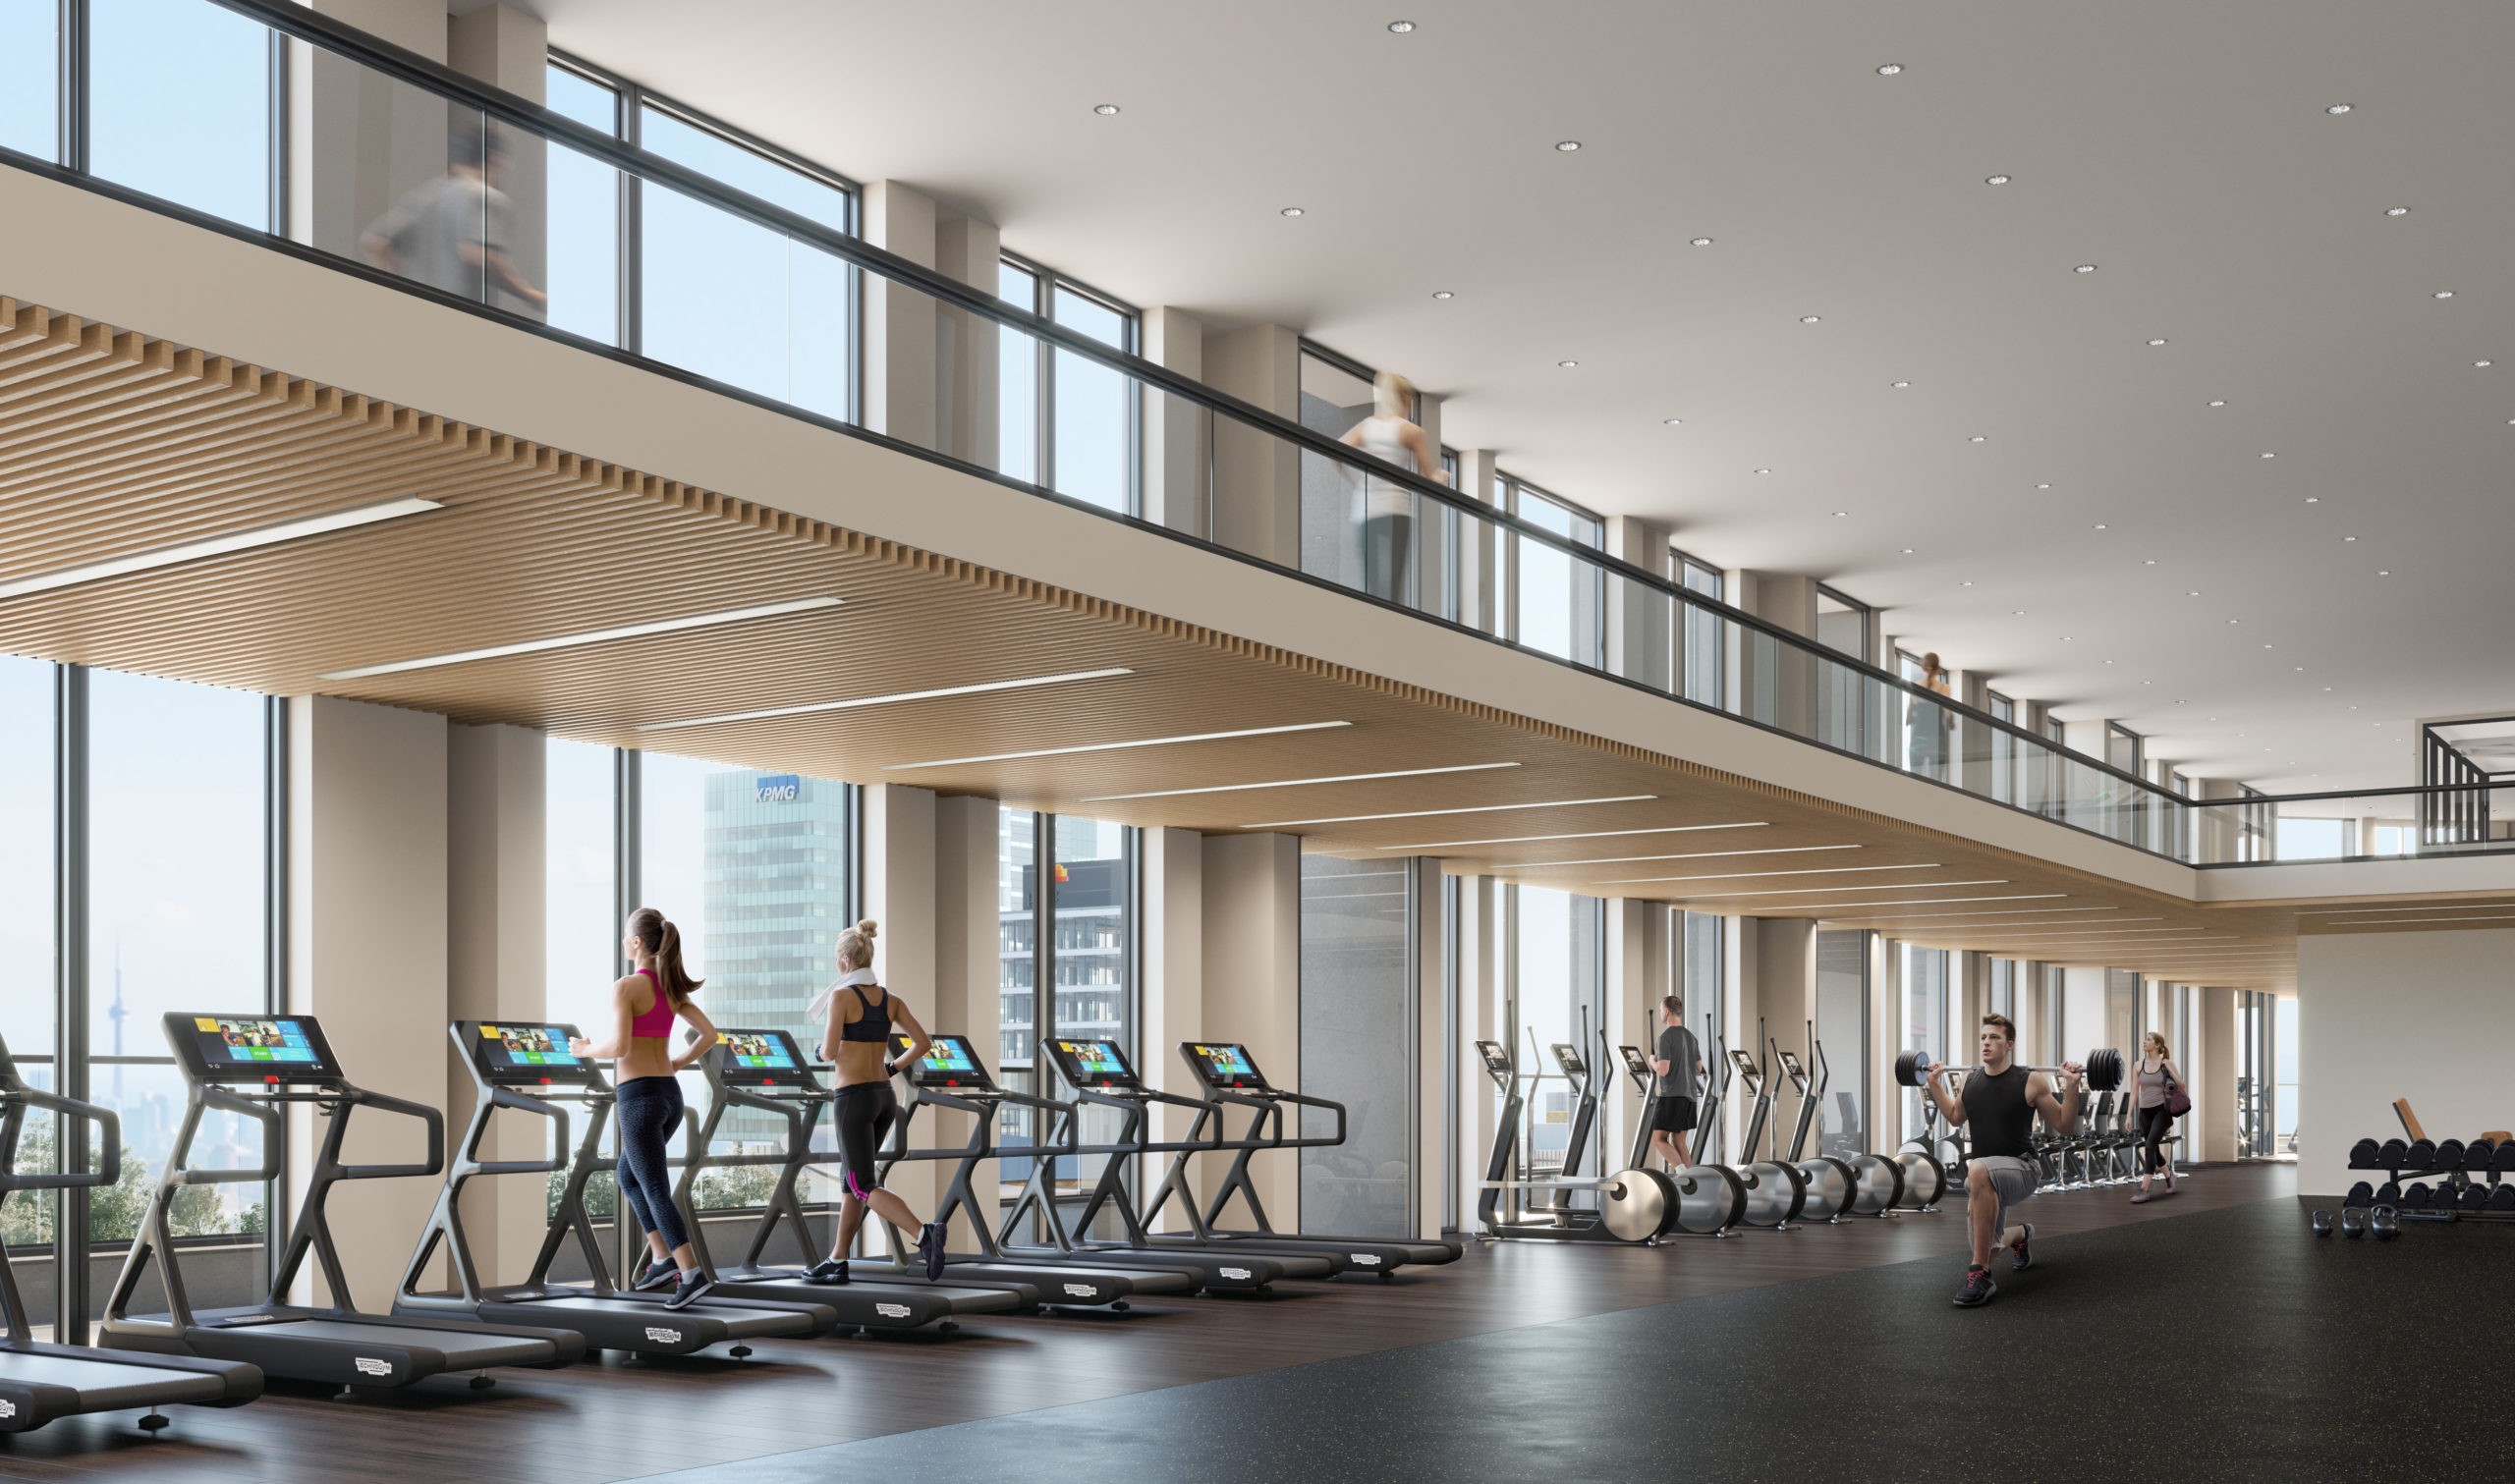 Amenity Centre Interior with Treadmills and Fitness, Fitness Amenity Centre Design, Transit City Amenity Centre in Toronto ON, by Cutler